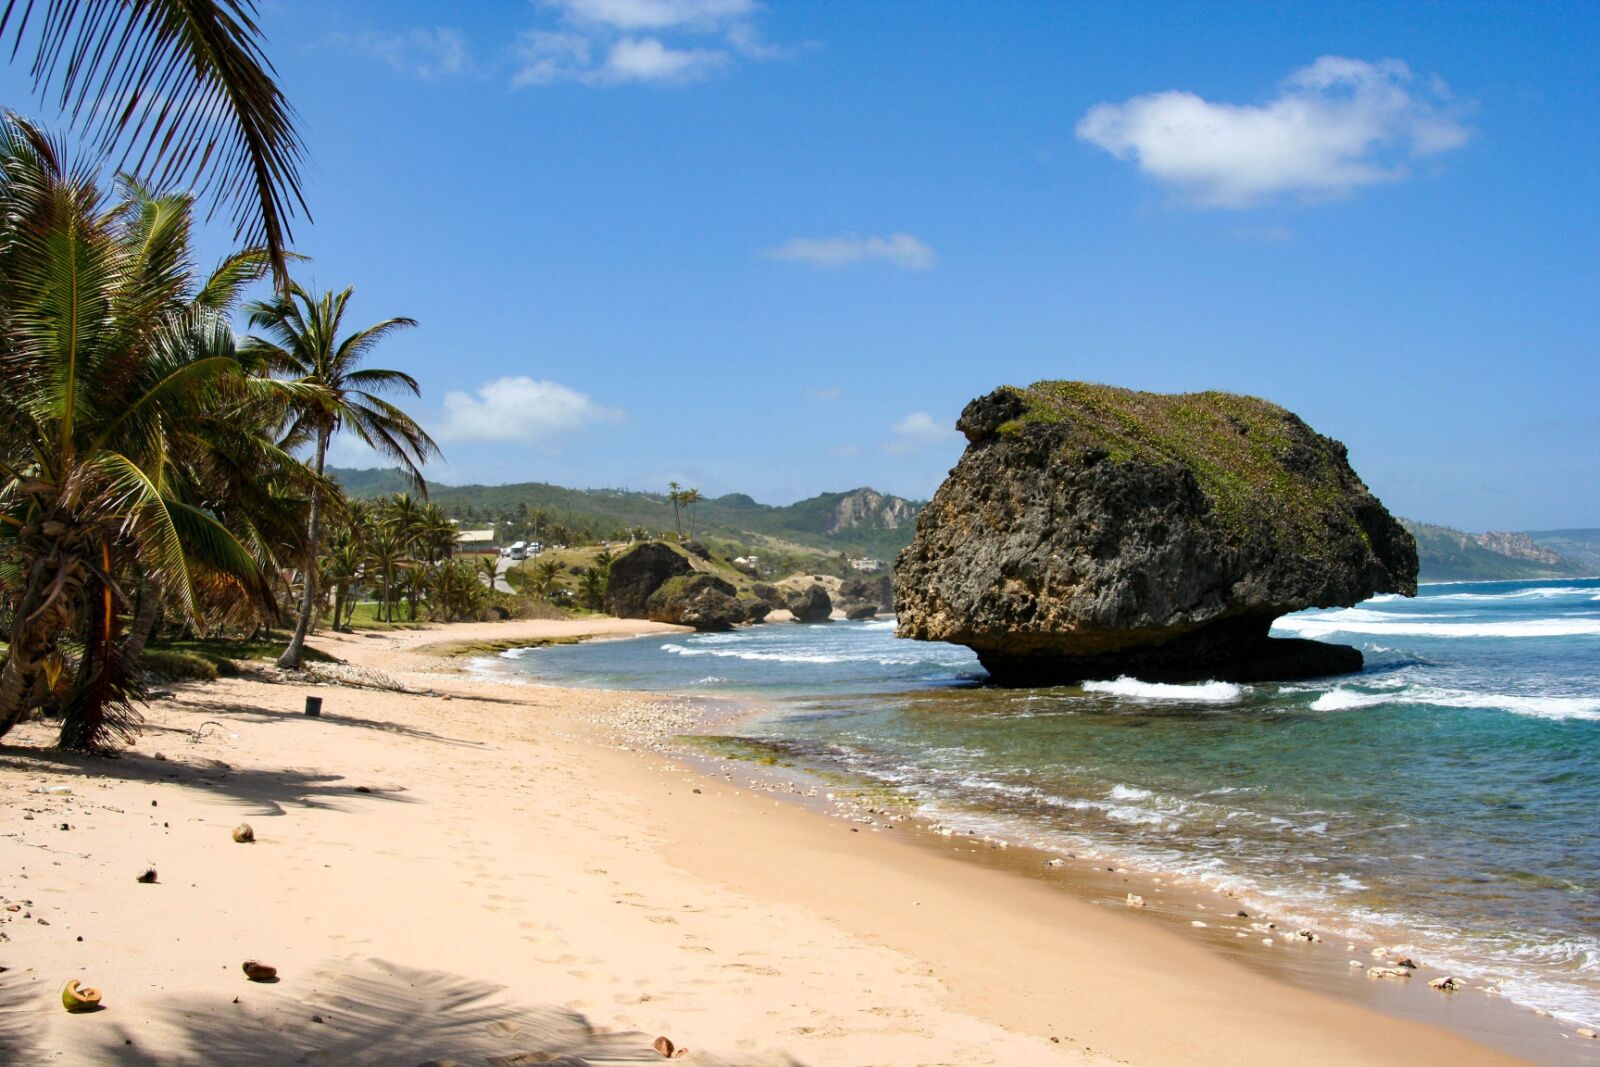 eastern barbados, the site of one of the best destination marathons